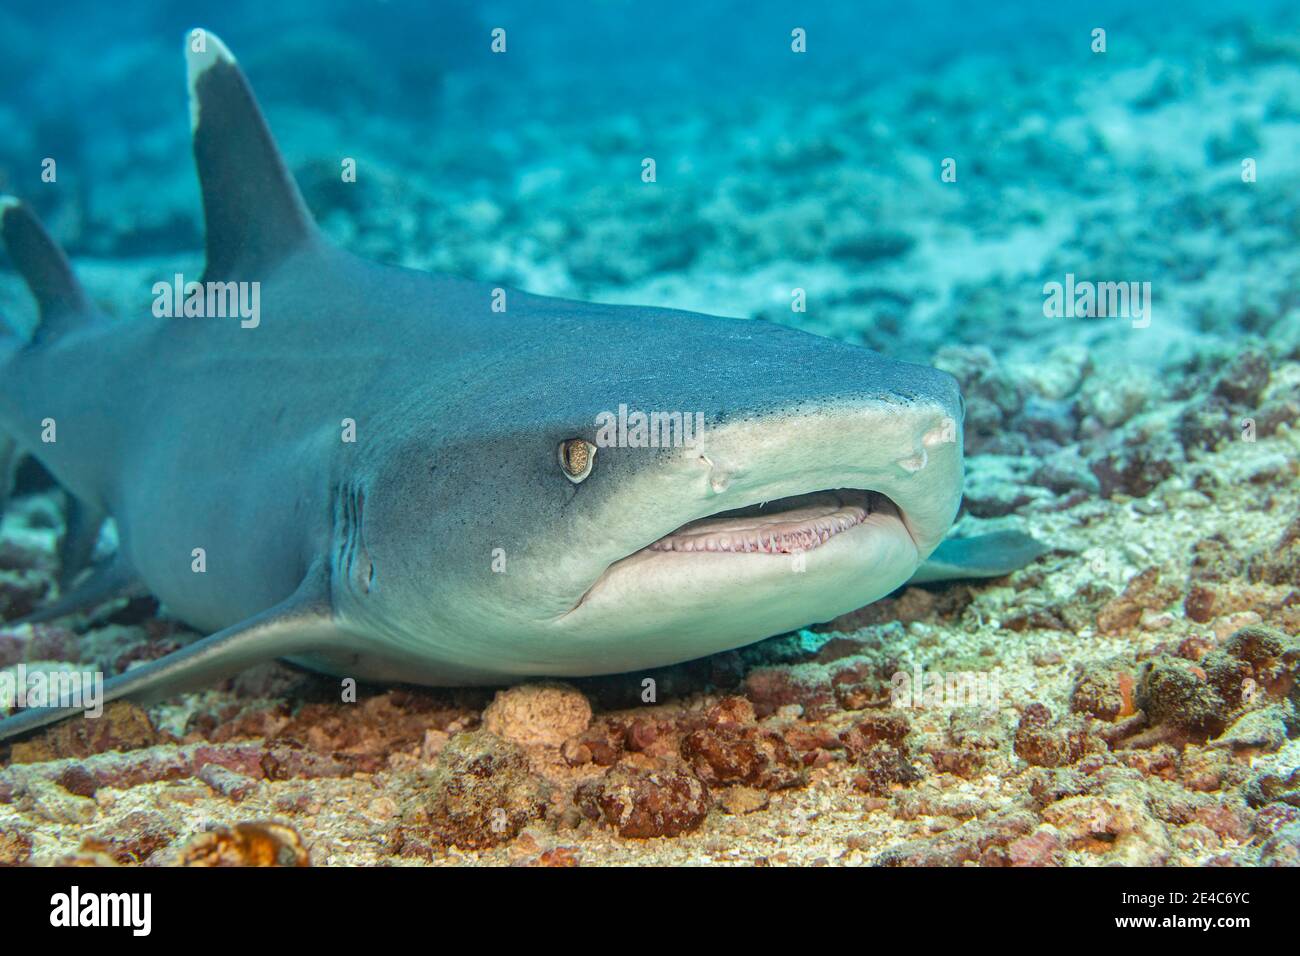 Whitetip reef sharks, Triaenodon obesus, are one of the few species of sharks that can stop and rest on the bottom, Yap, Federated States of Micronesi Stock Photo